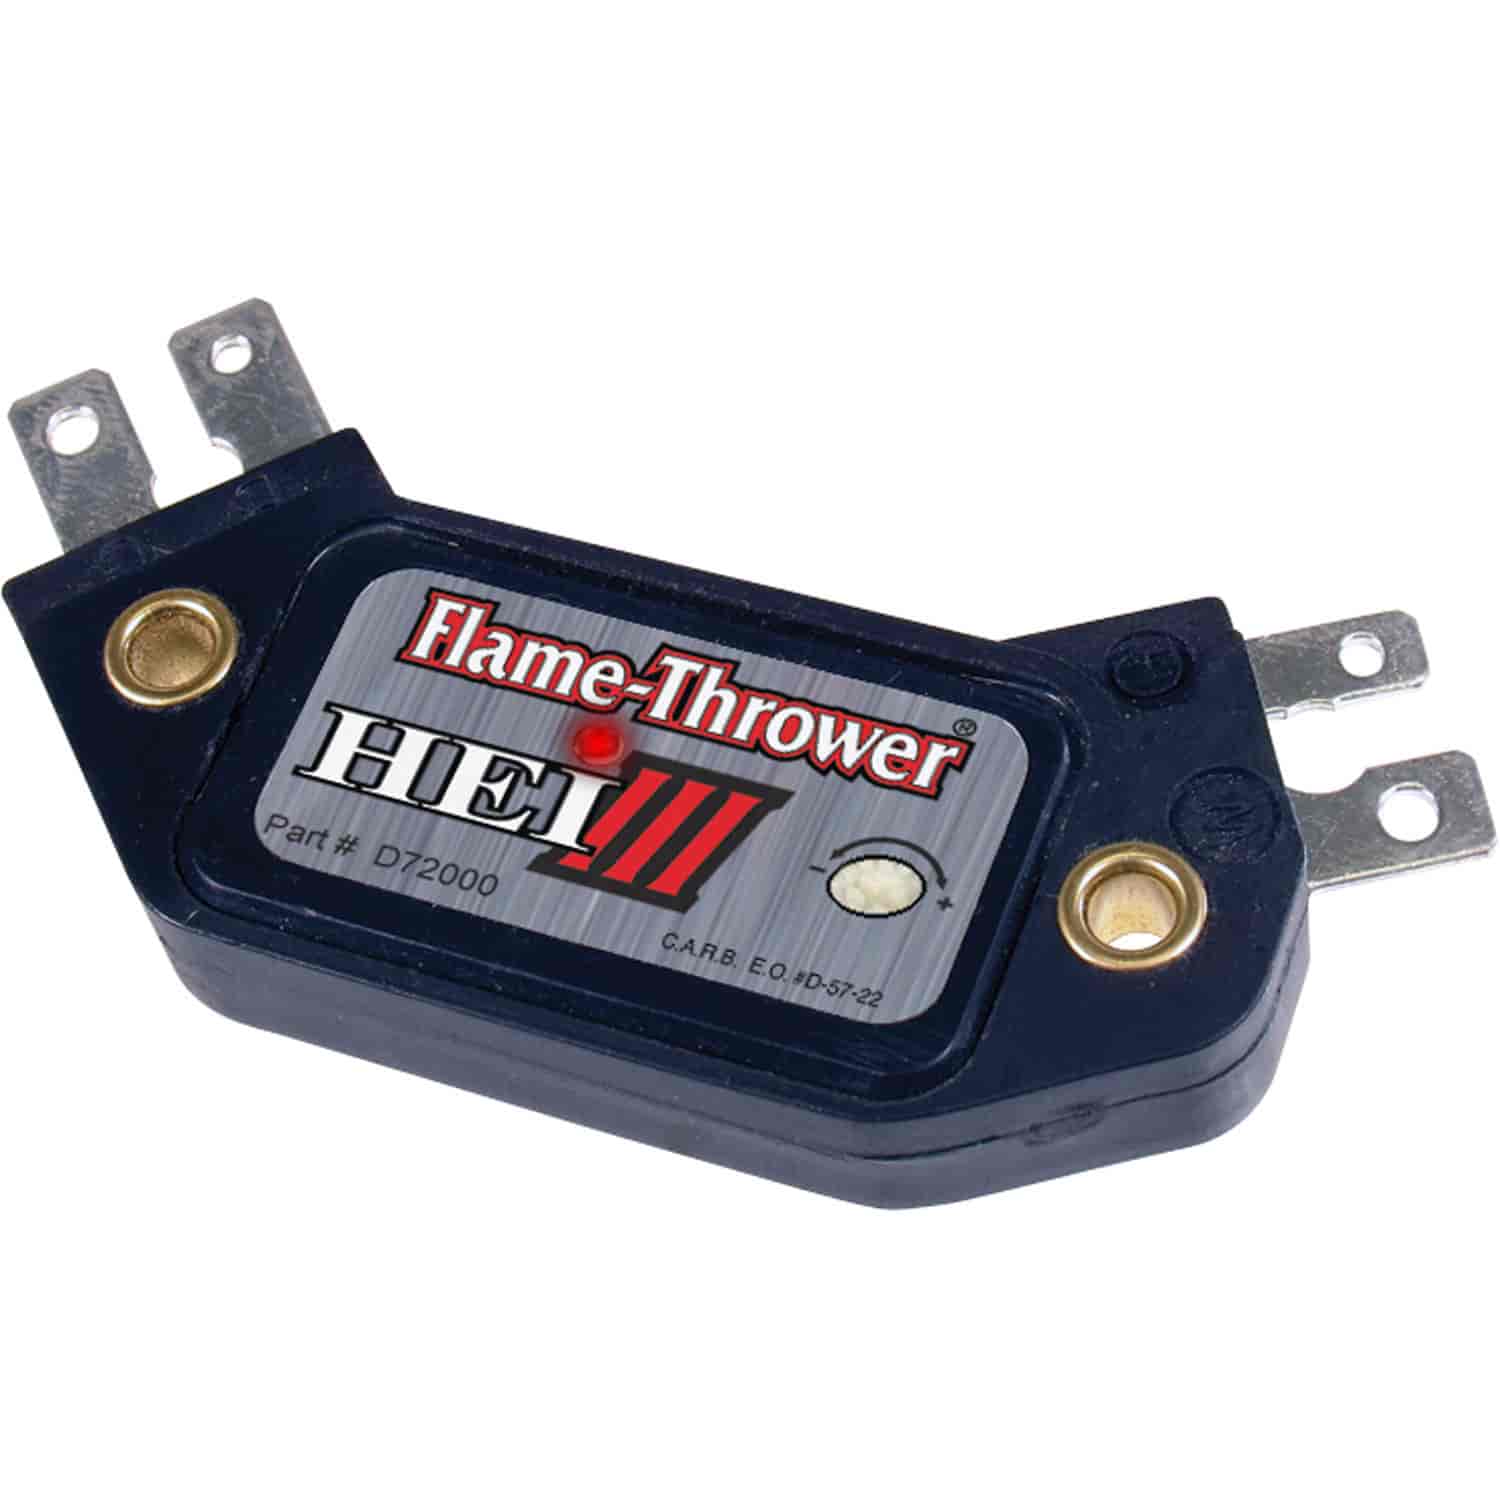 Pertronix D72000 Flame-Thrower HEI III Ignition Module